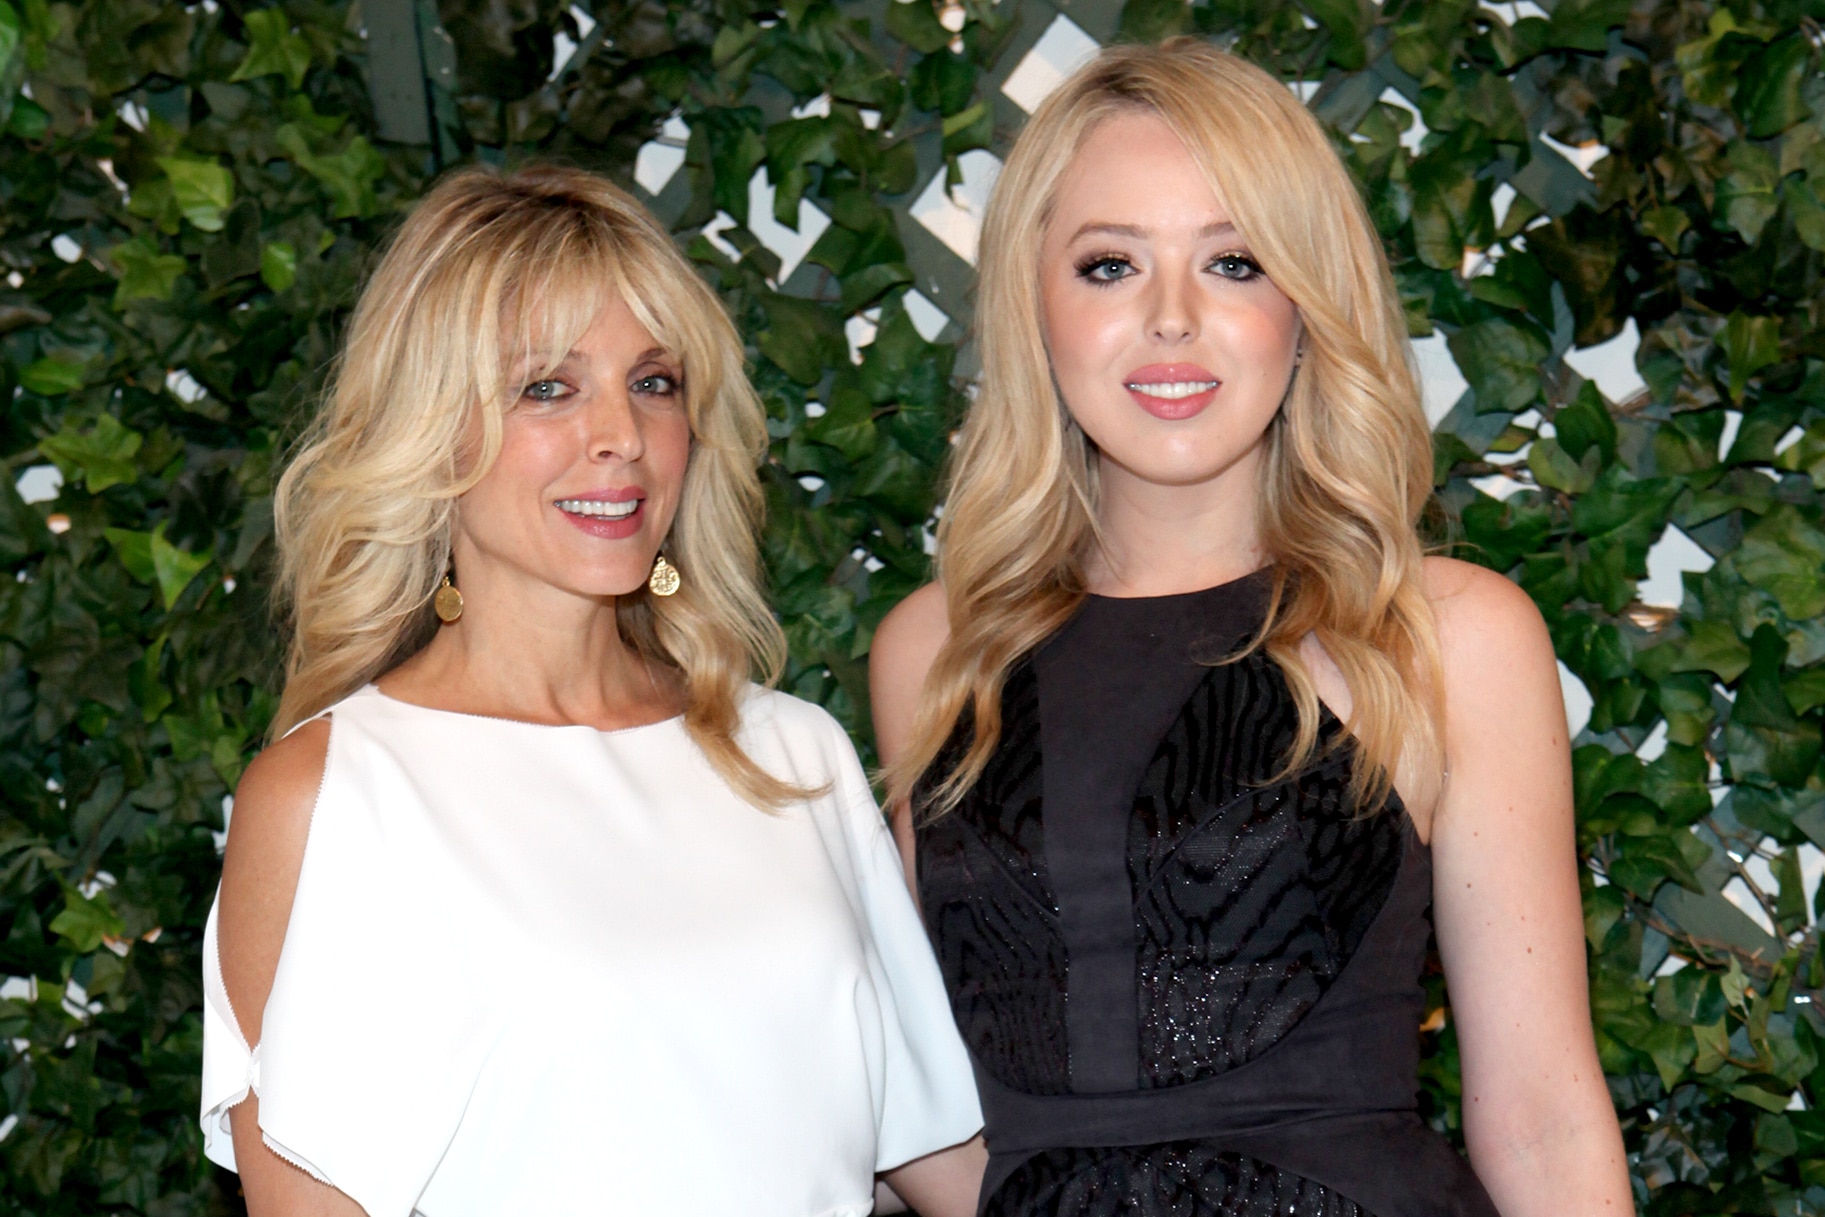 Marla Maples Tiffany Trump Asked For Free Beauty Services